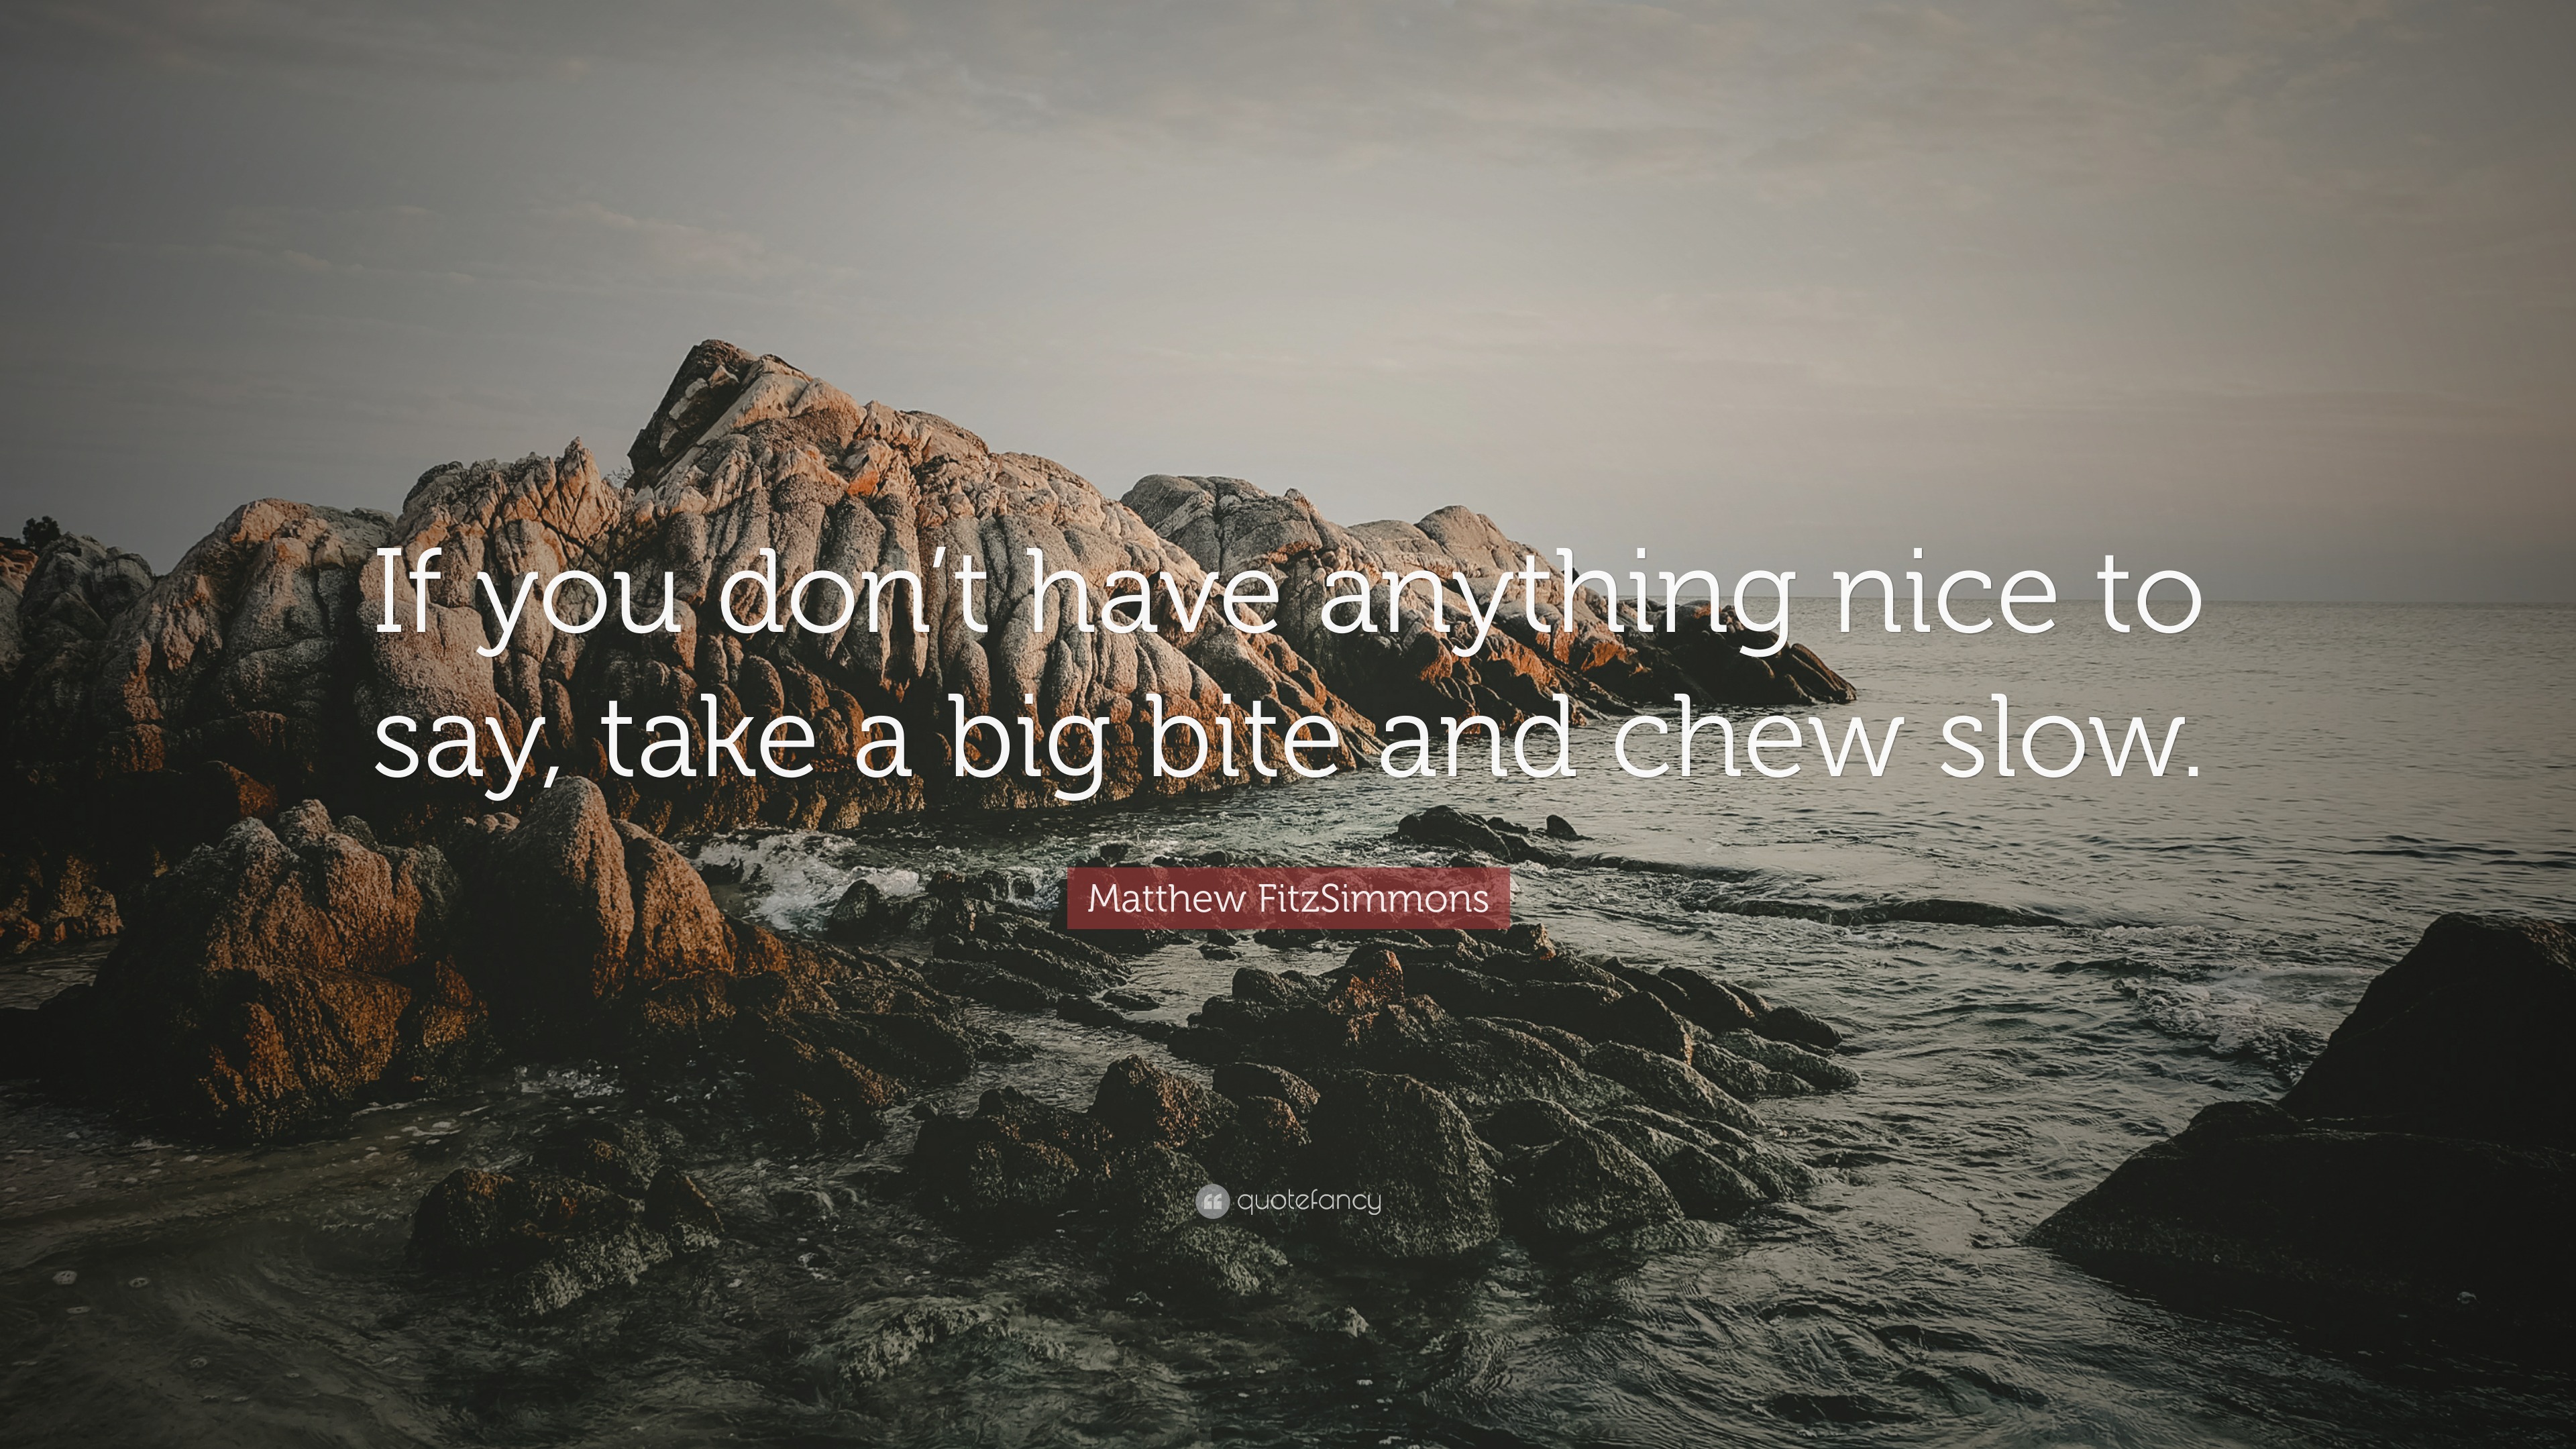 Matthew FitzSimmons Quote: “If you don't have anything nice to say, take a  big bite